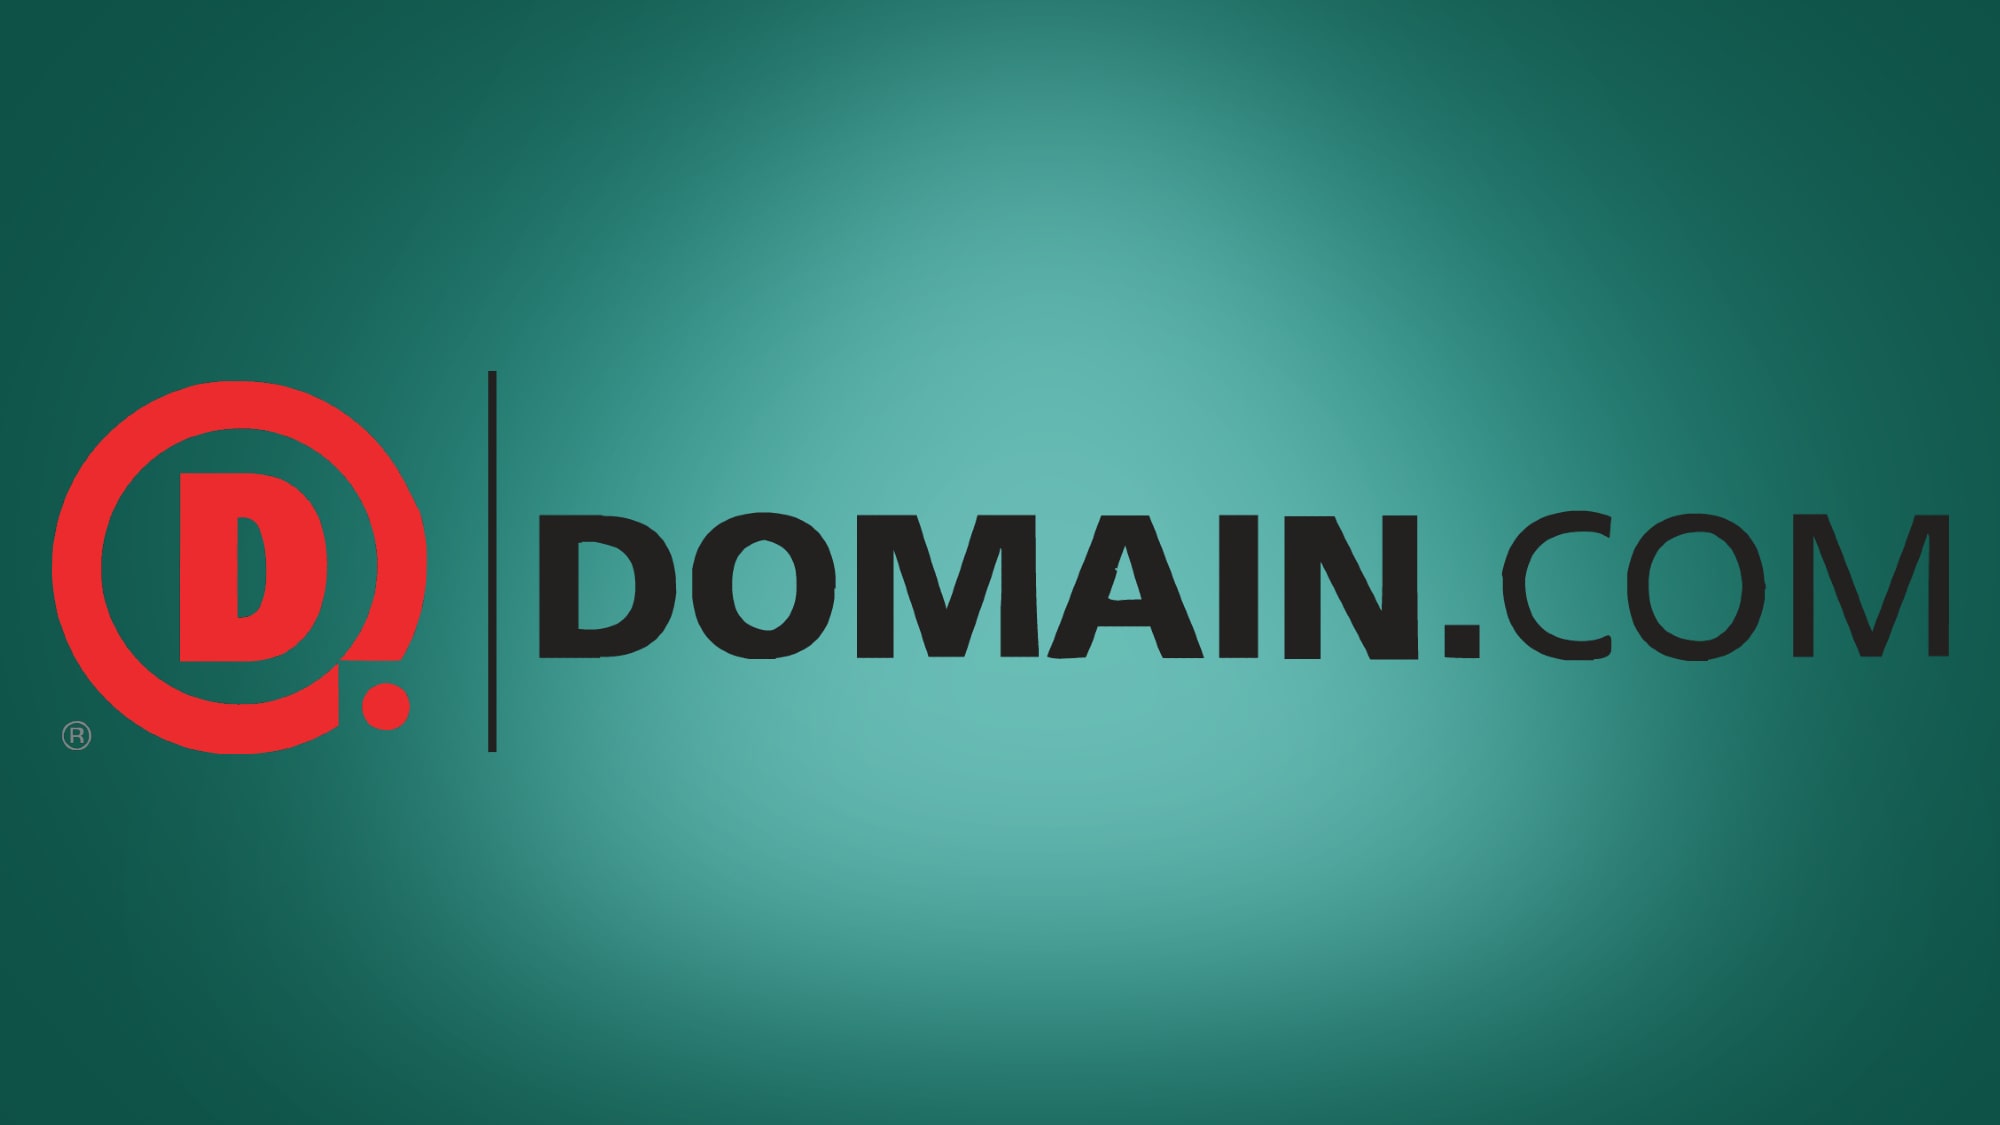 Domain.com logo on turquoise background with spotlight effect